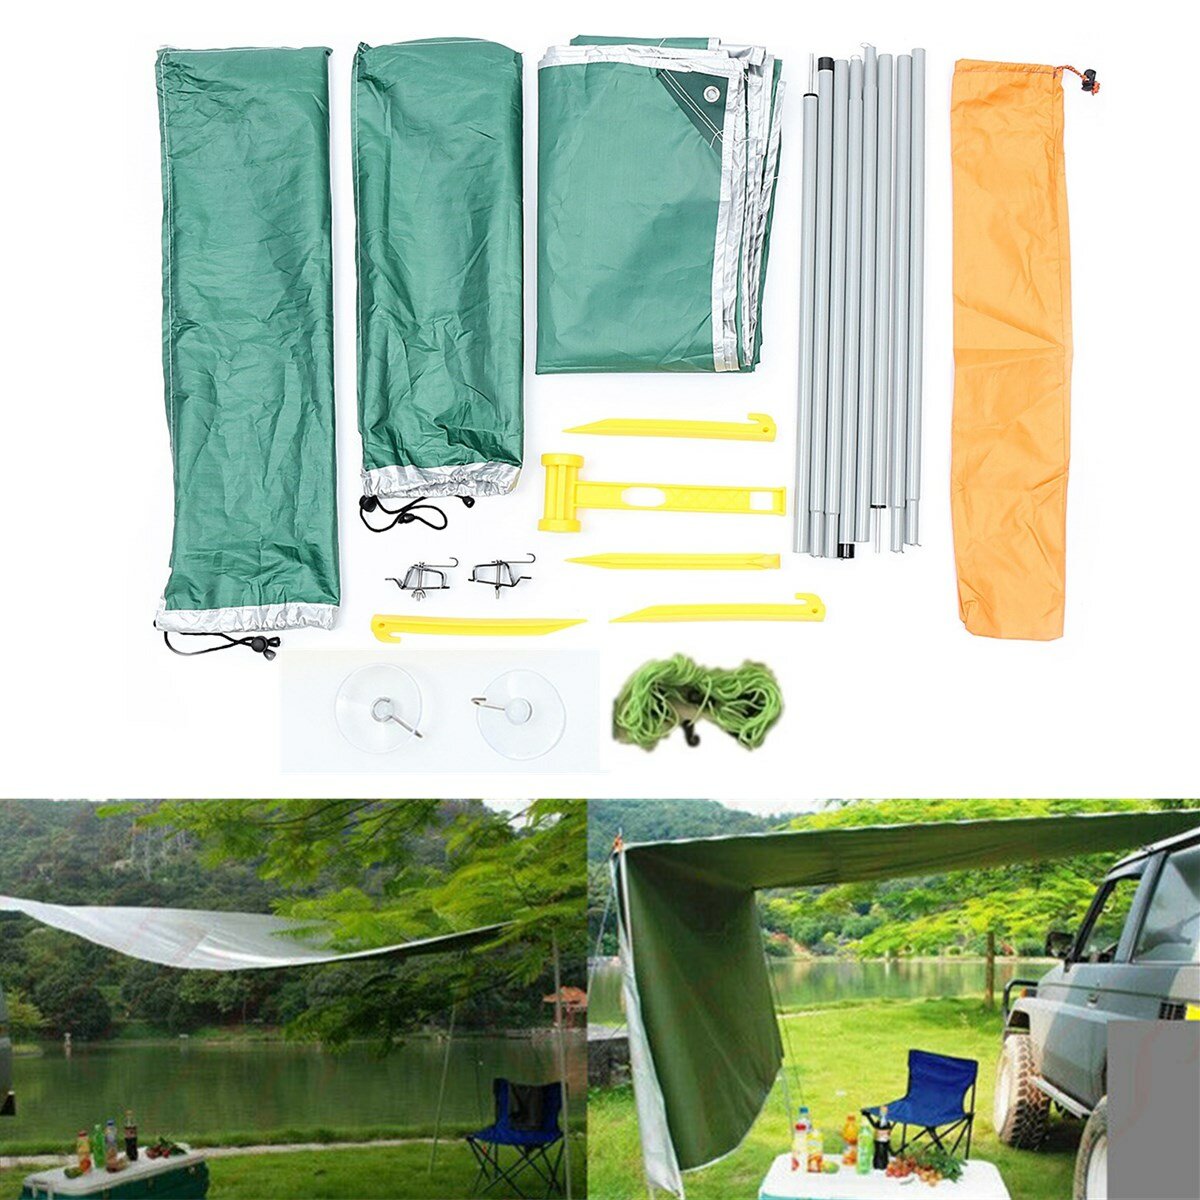 2.8x1.8M Car Side Awning Rooftop Tent Sunshade Outdoor Camping Travel Tent